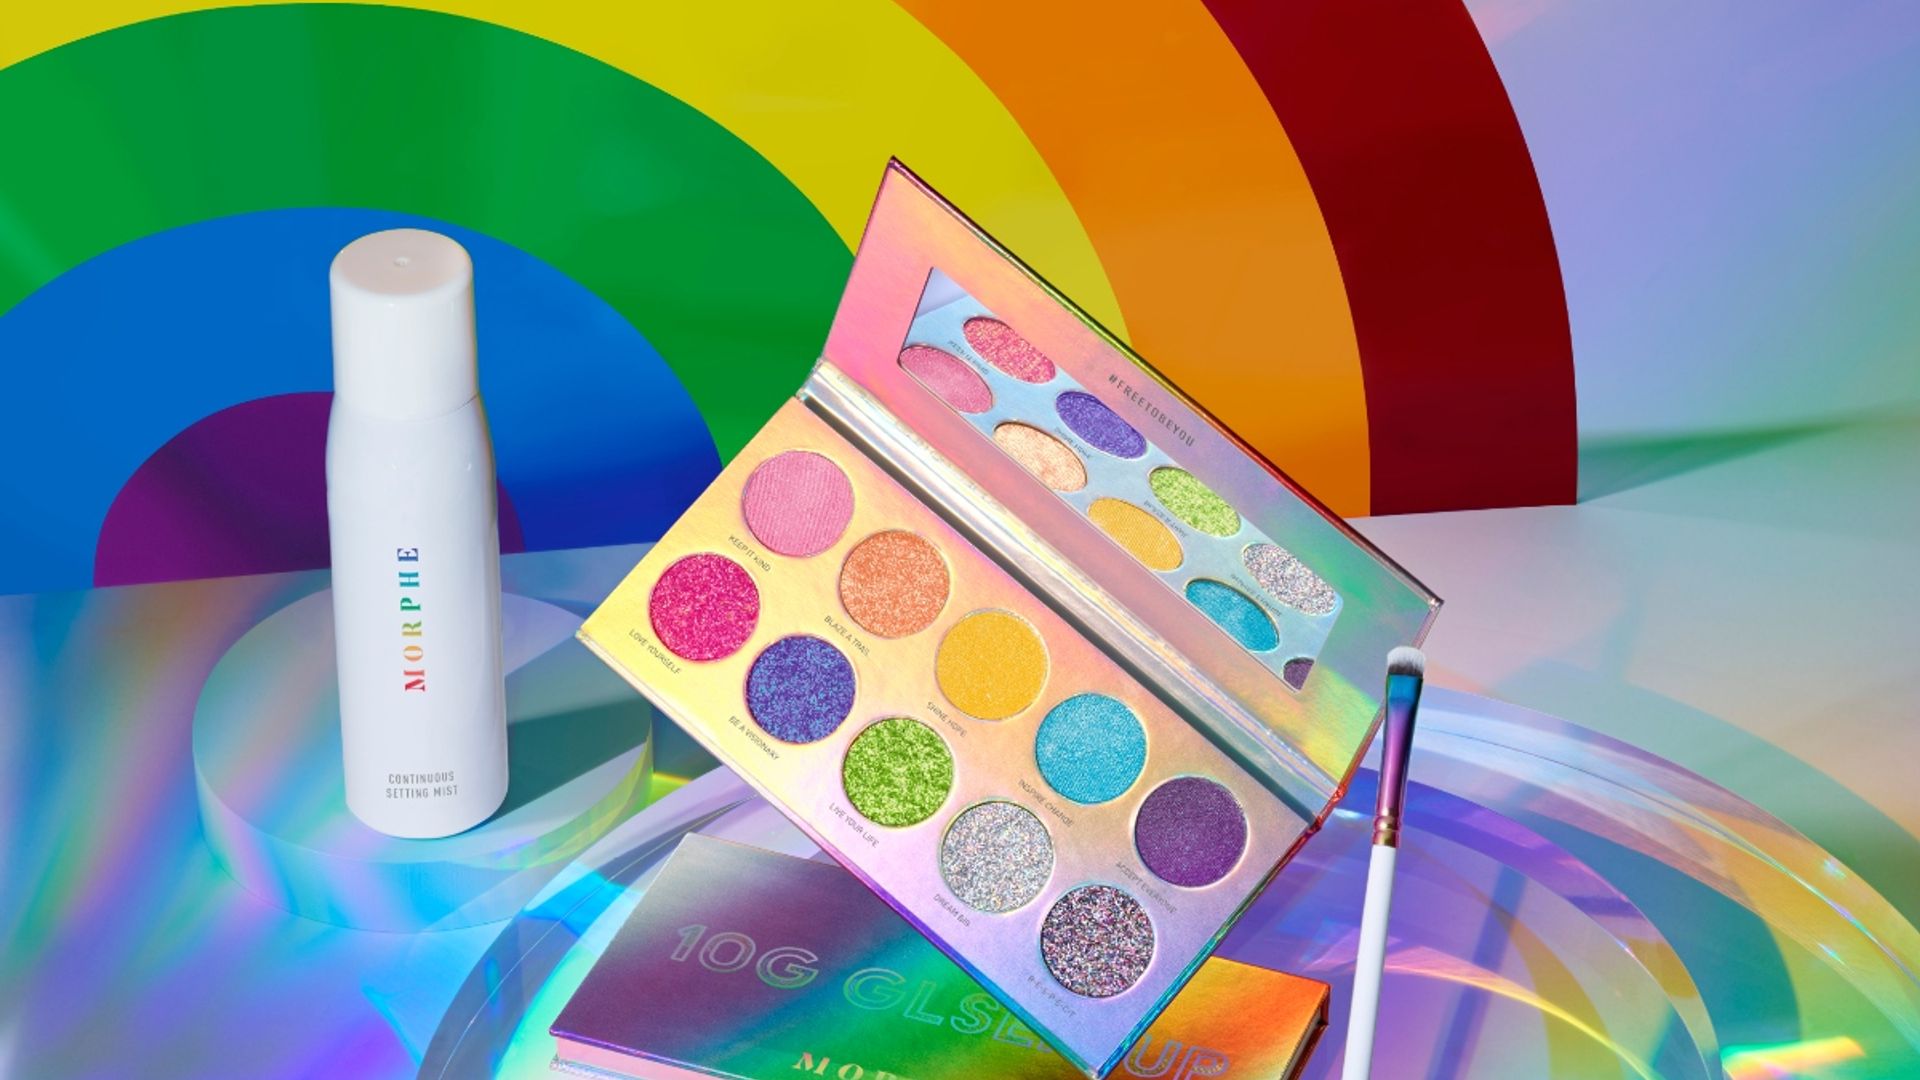 Morphe cosmetics launches rainbow Pride collection to support LGBTQ+ youth